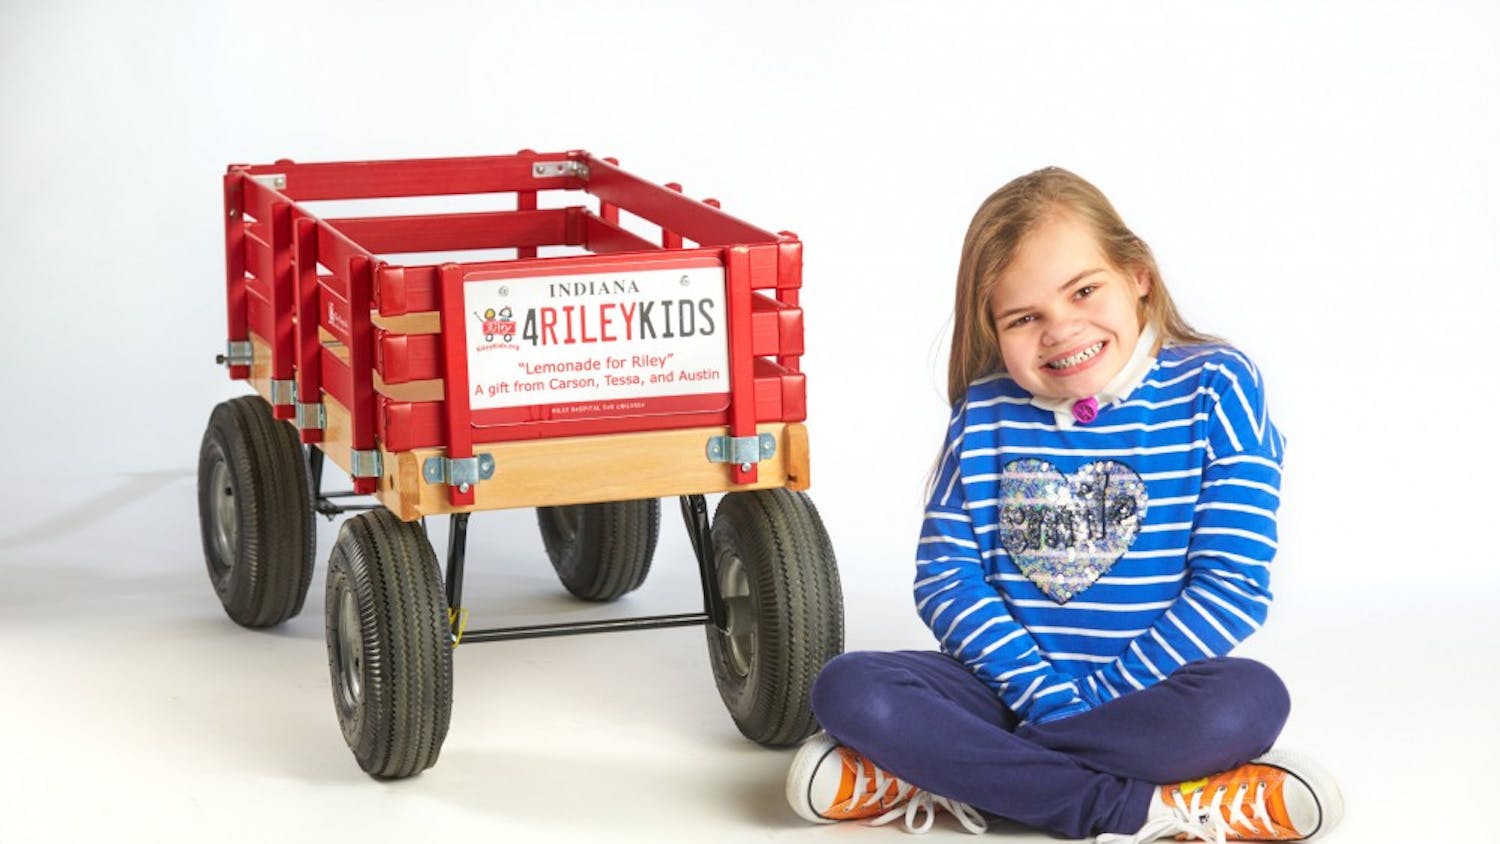 Monroe County fourth-grader&nbsp;Marlee Davenport was chosen&nbsp;by&nbsp;Riley Children’s Foundation to be featured on Riley billboards. Marlee spent six months at Riley after birth when&nbsp;doctors discovered she was missing most of her rib cage and was unable to breathe on her own.&nbsp;